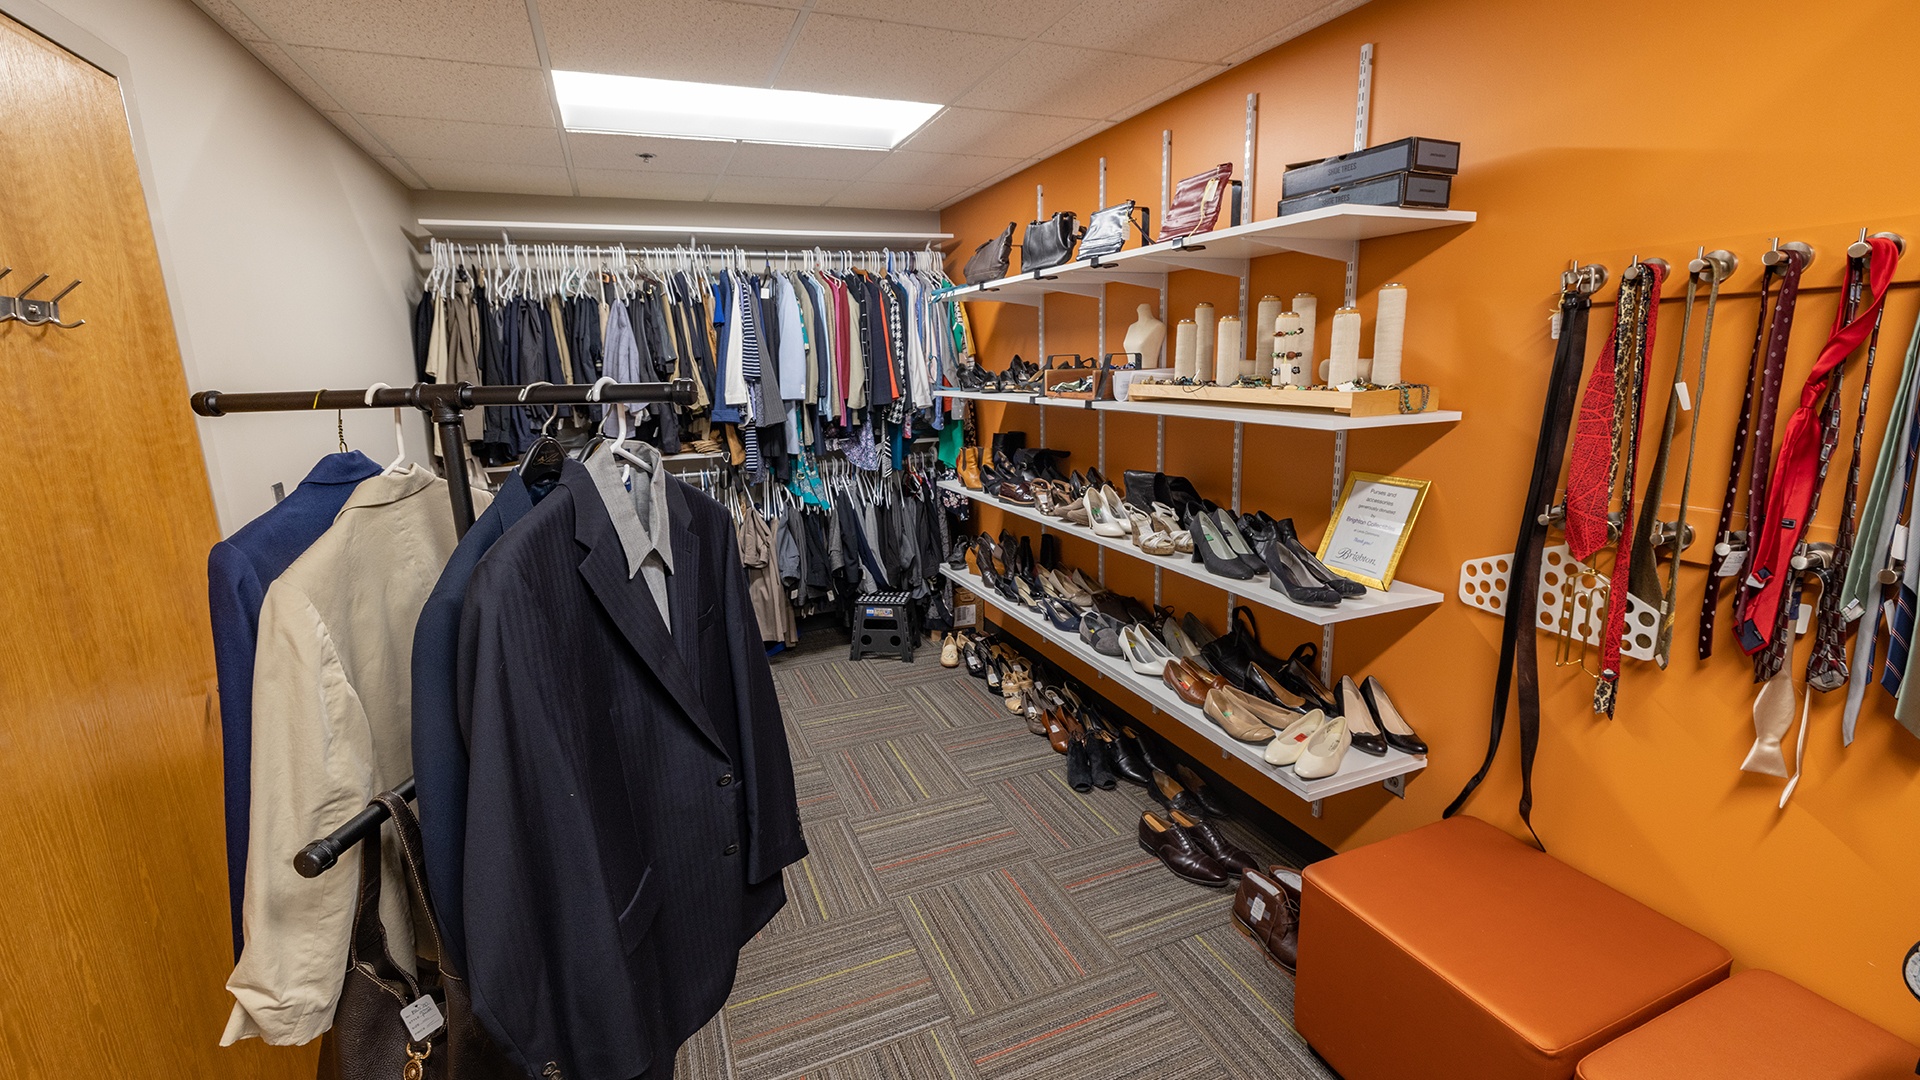 Room houses professional attire for BGSU students to select